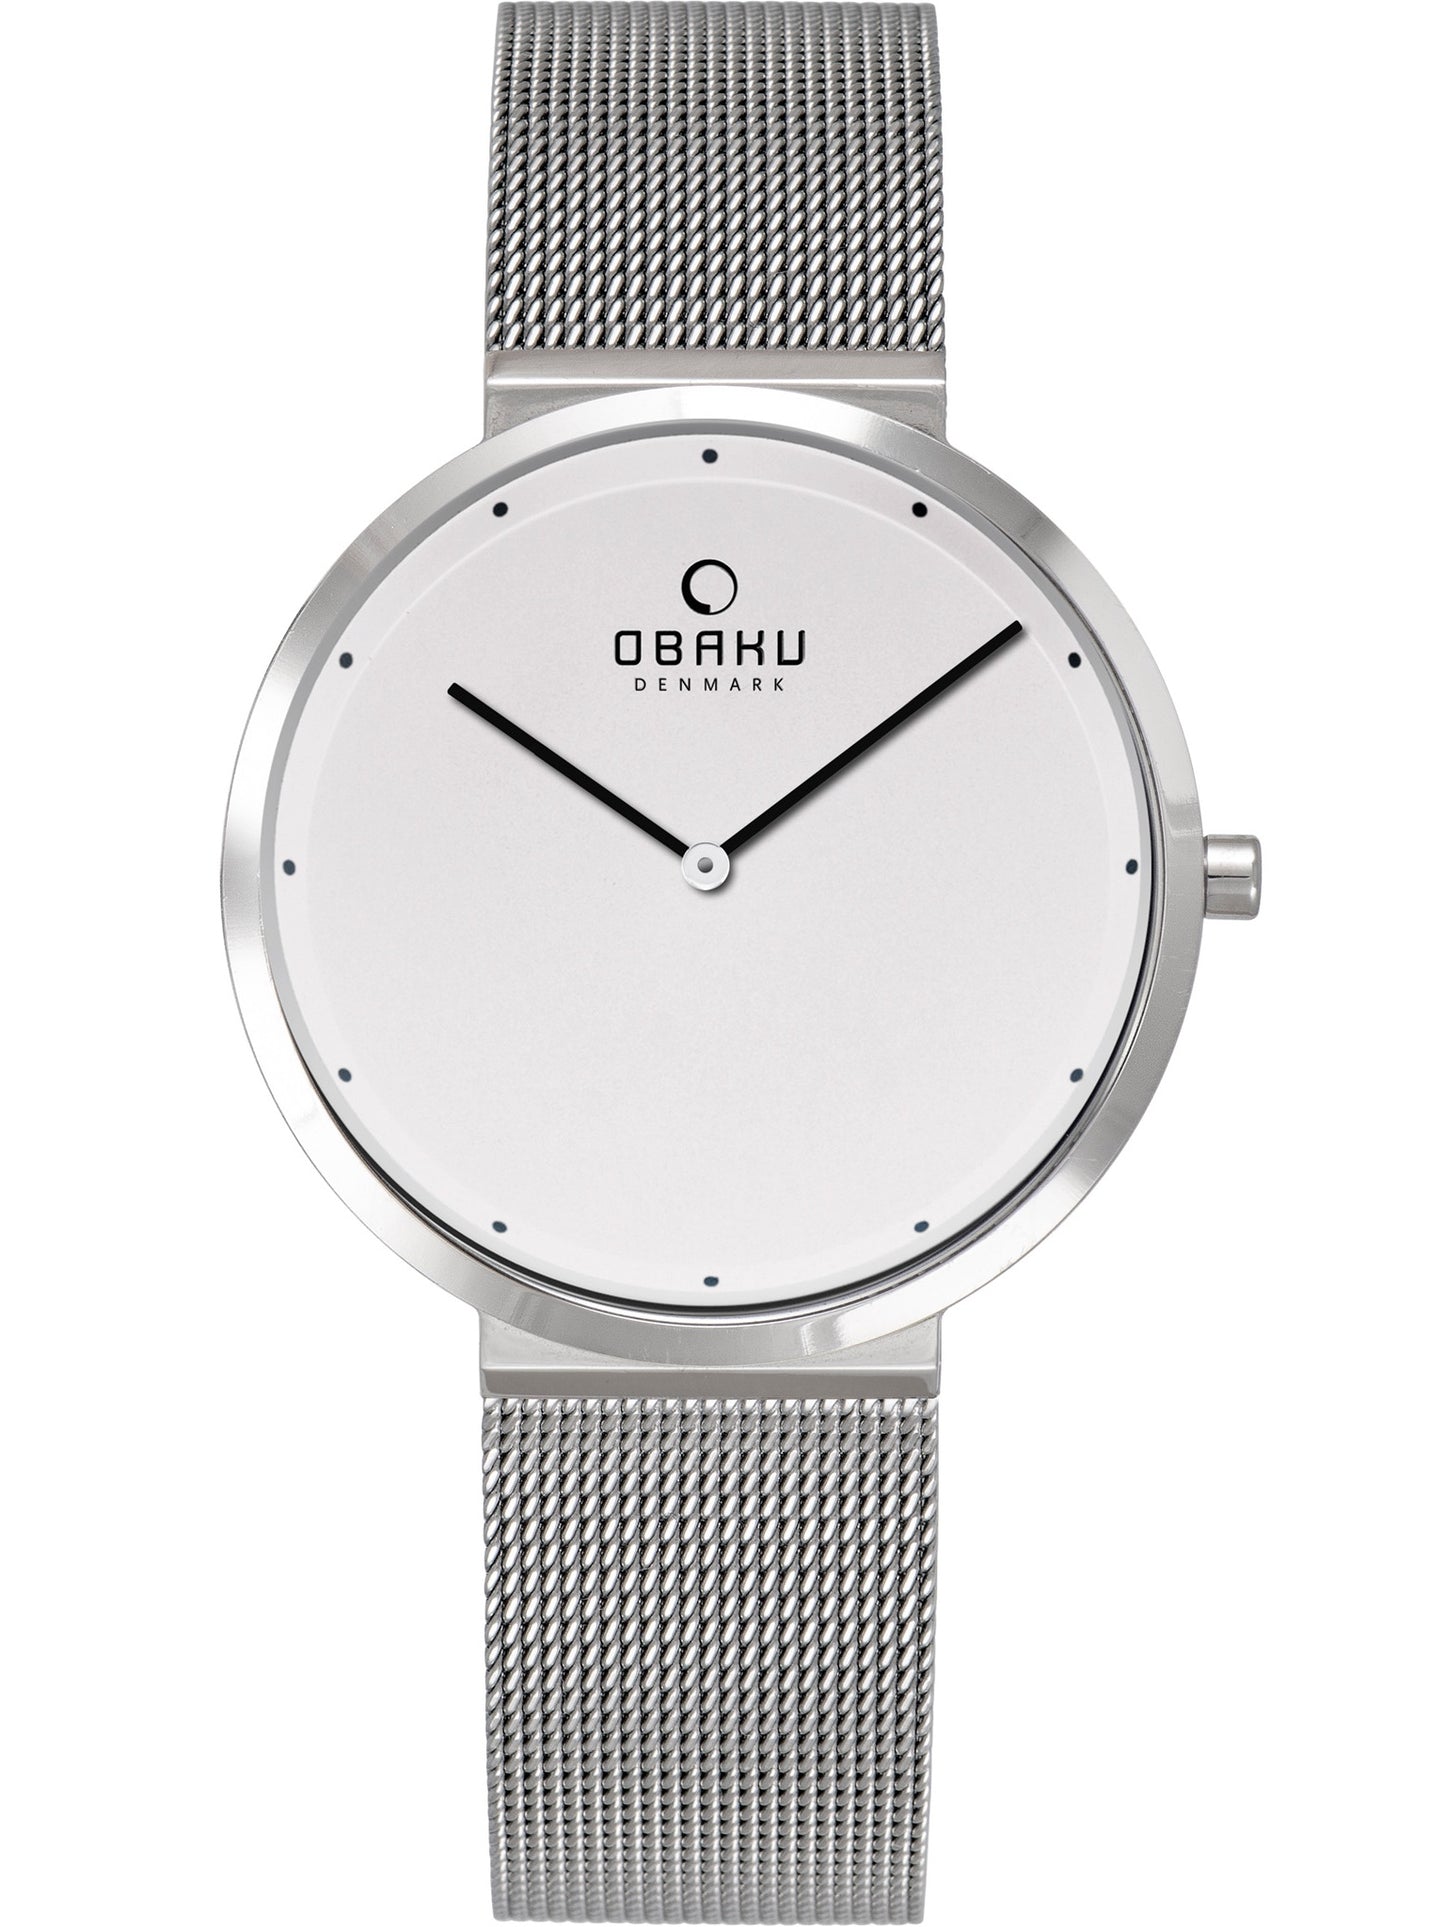 An Obaku Ladies Papir Lille Steel Slim Sapphire Watch V230LXCWMC with a white dial and a mesh bracelet.